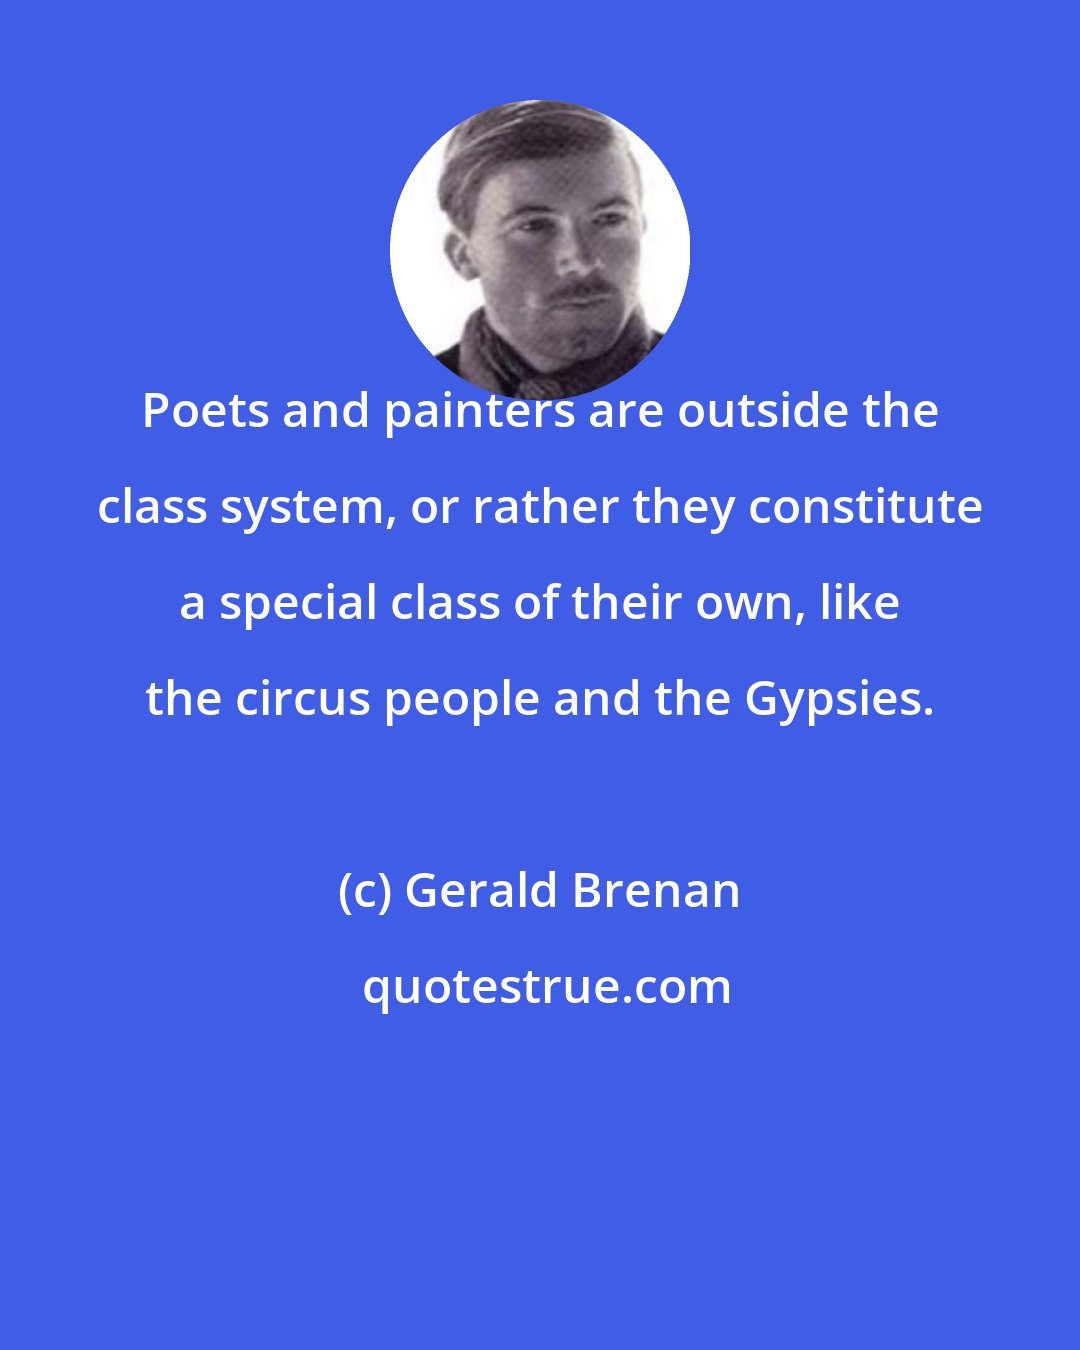 Gerald Brenan: Poets and painters are outside the class system, or rather they constitute a special class of their own, like the circus people and the Gypsies.